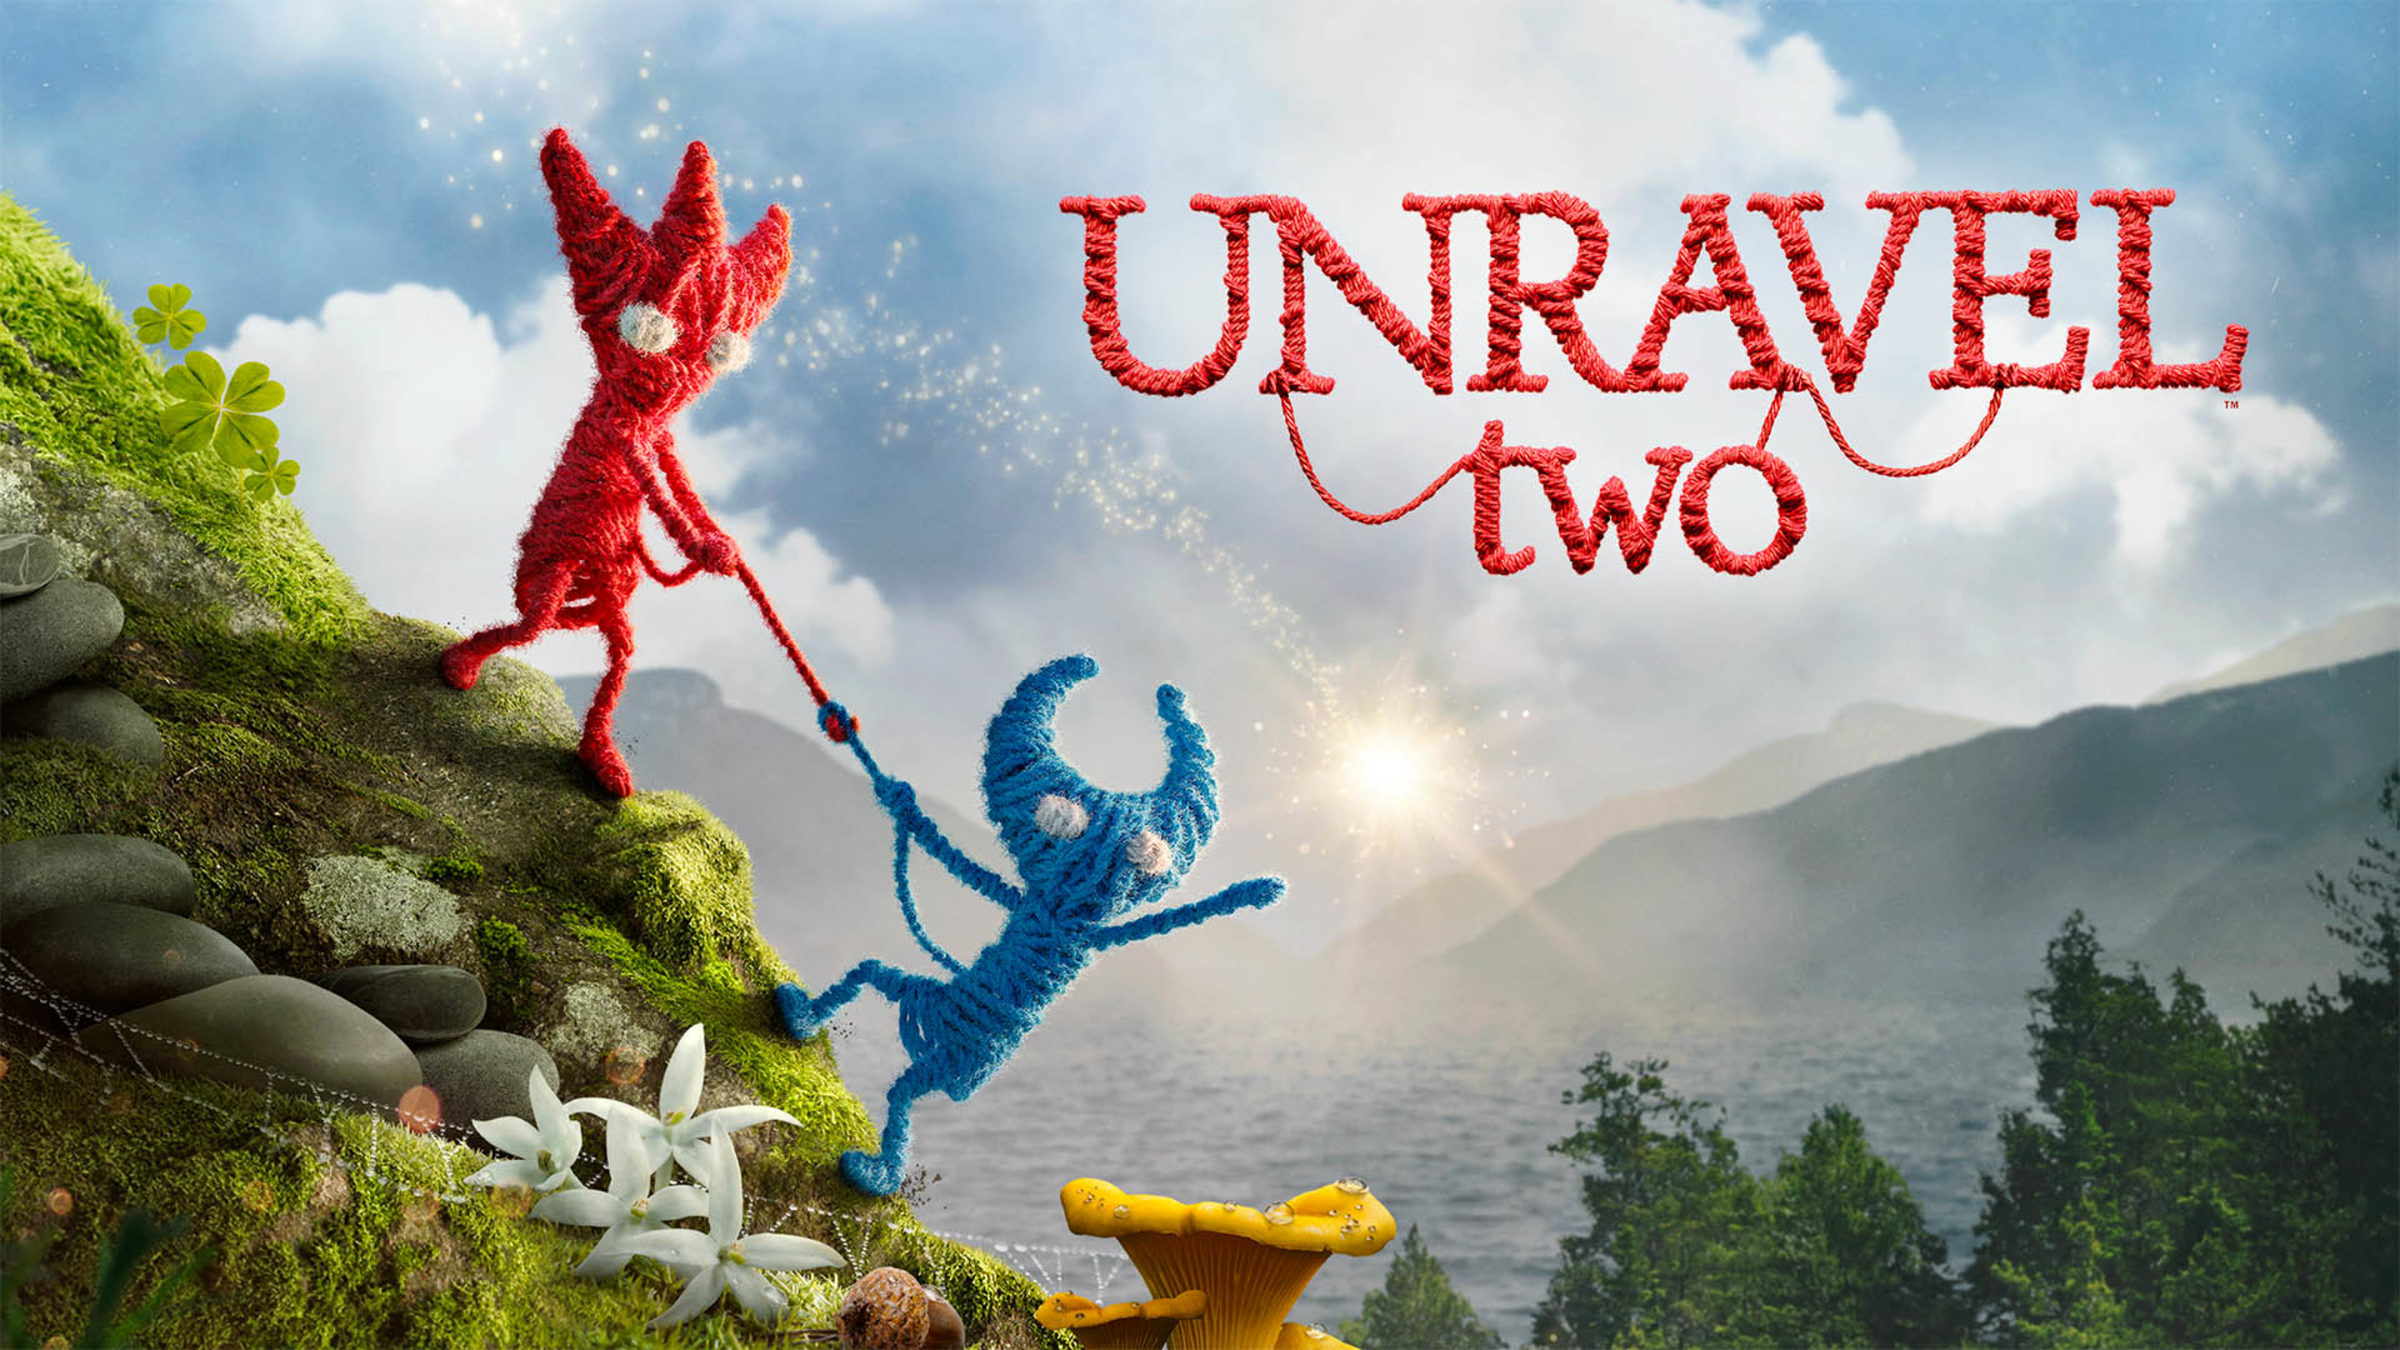 Why Unravel Two is not on Nintendo Switch